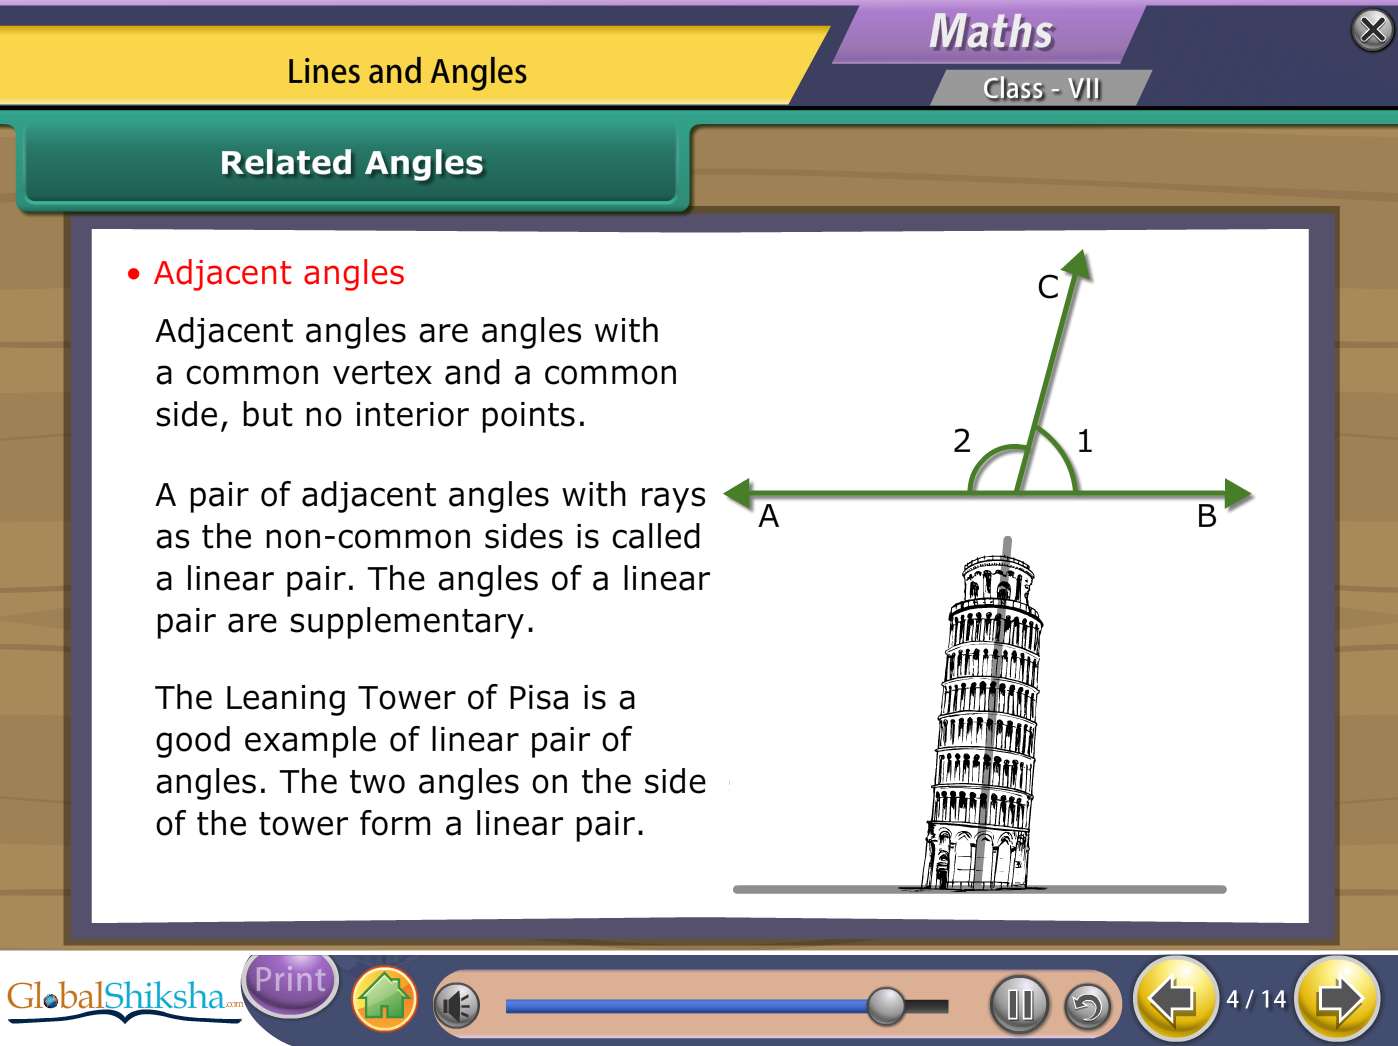 Tamil Nadu State Board Class 7 Maths & Science Animated Pendrive in English